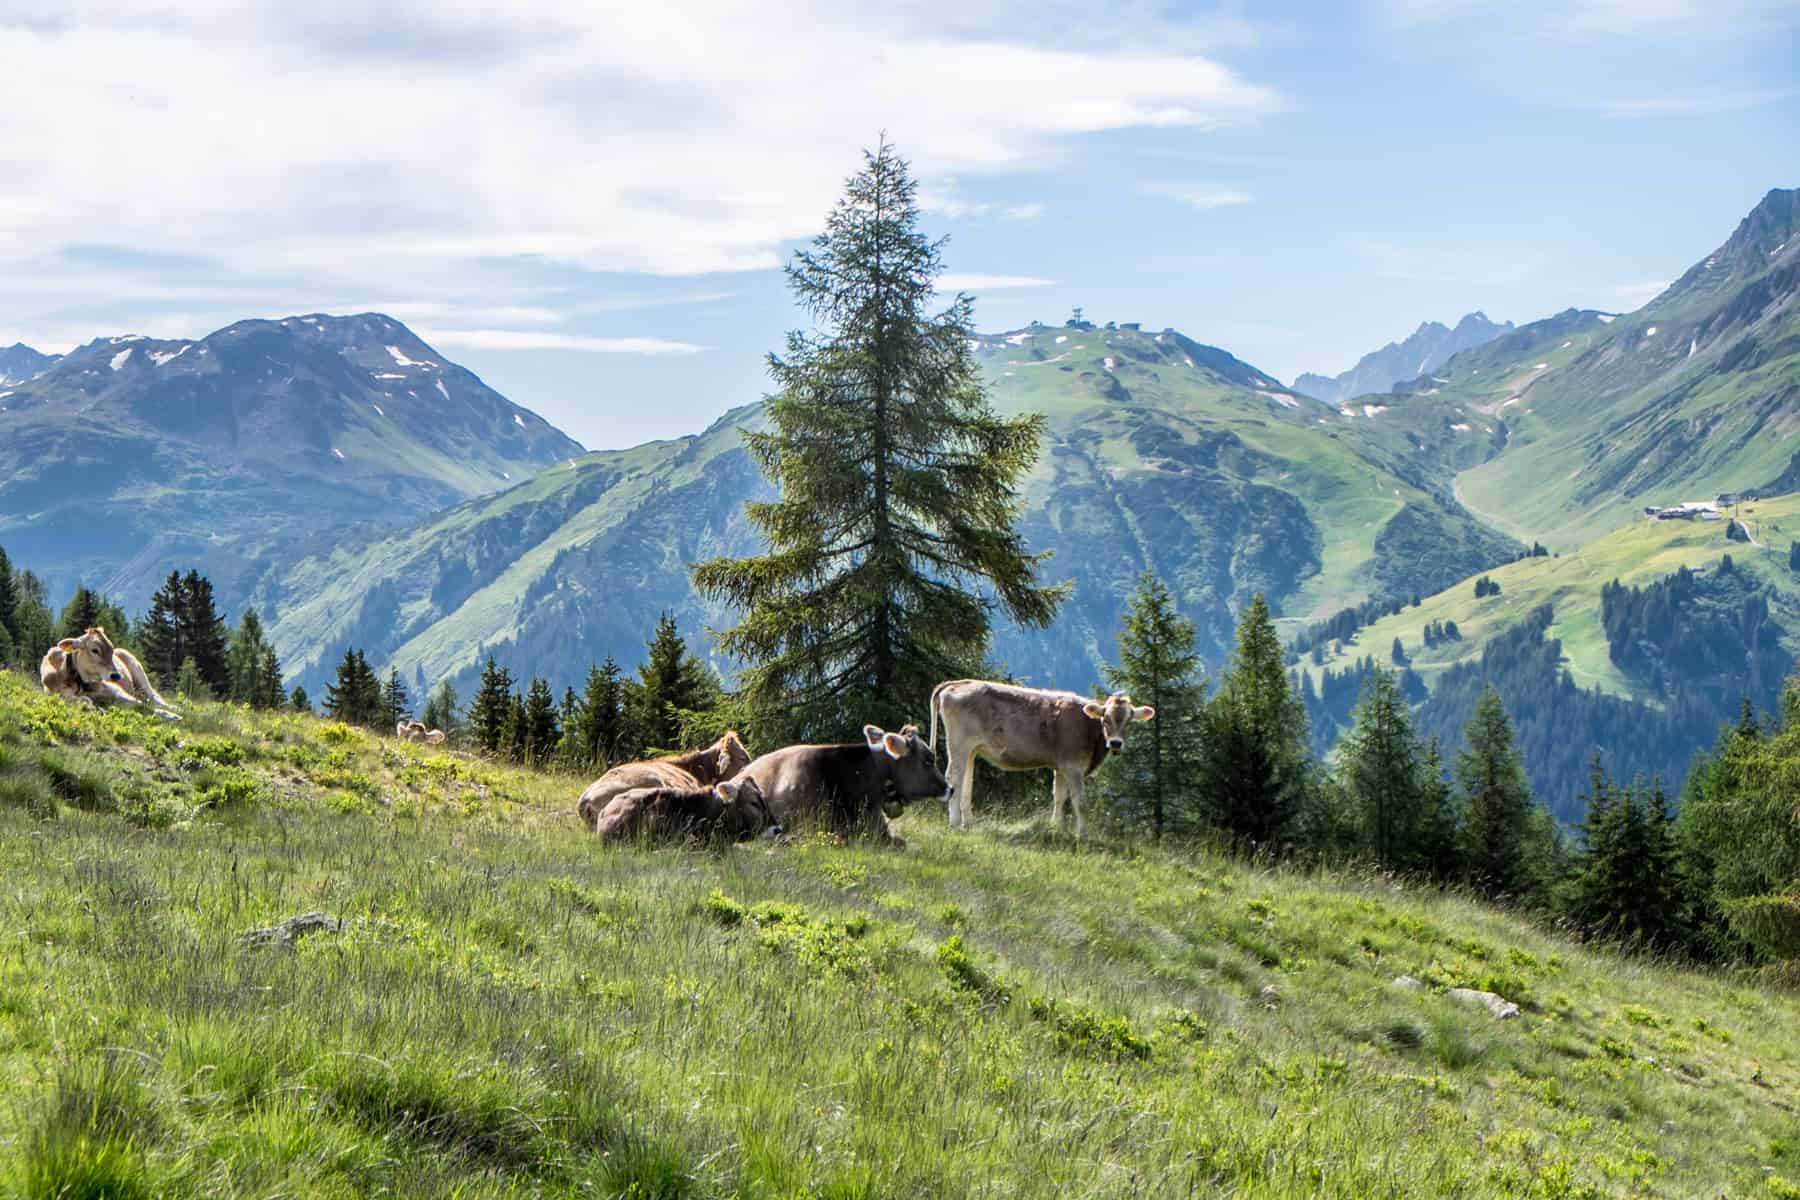 A small group of Cows in the alpine pasture of St Anton am Arlberg